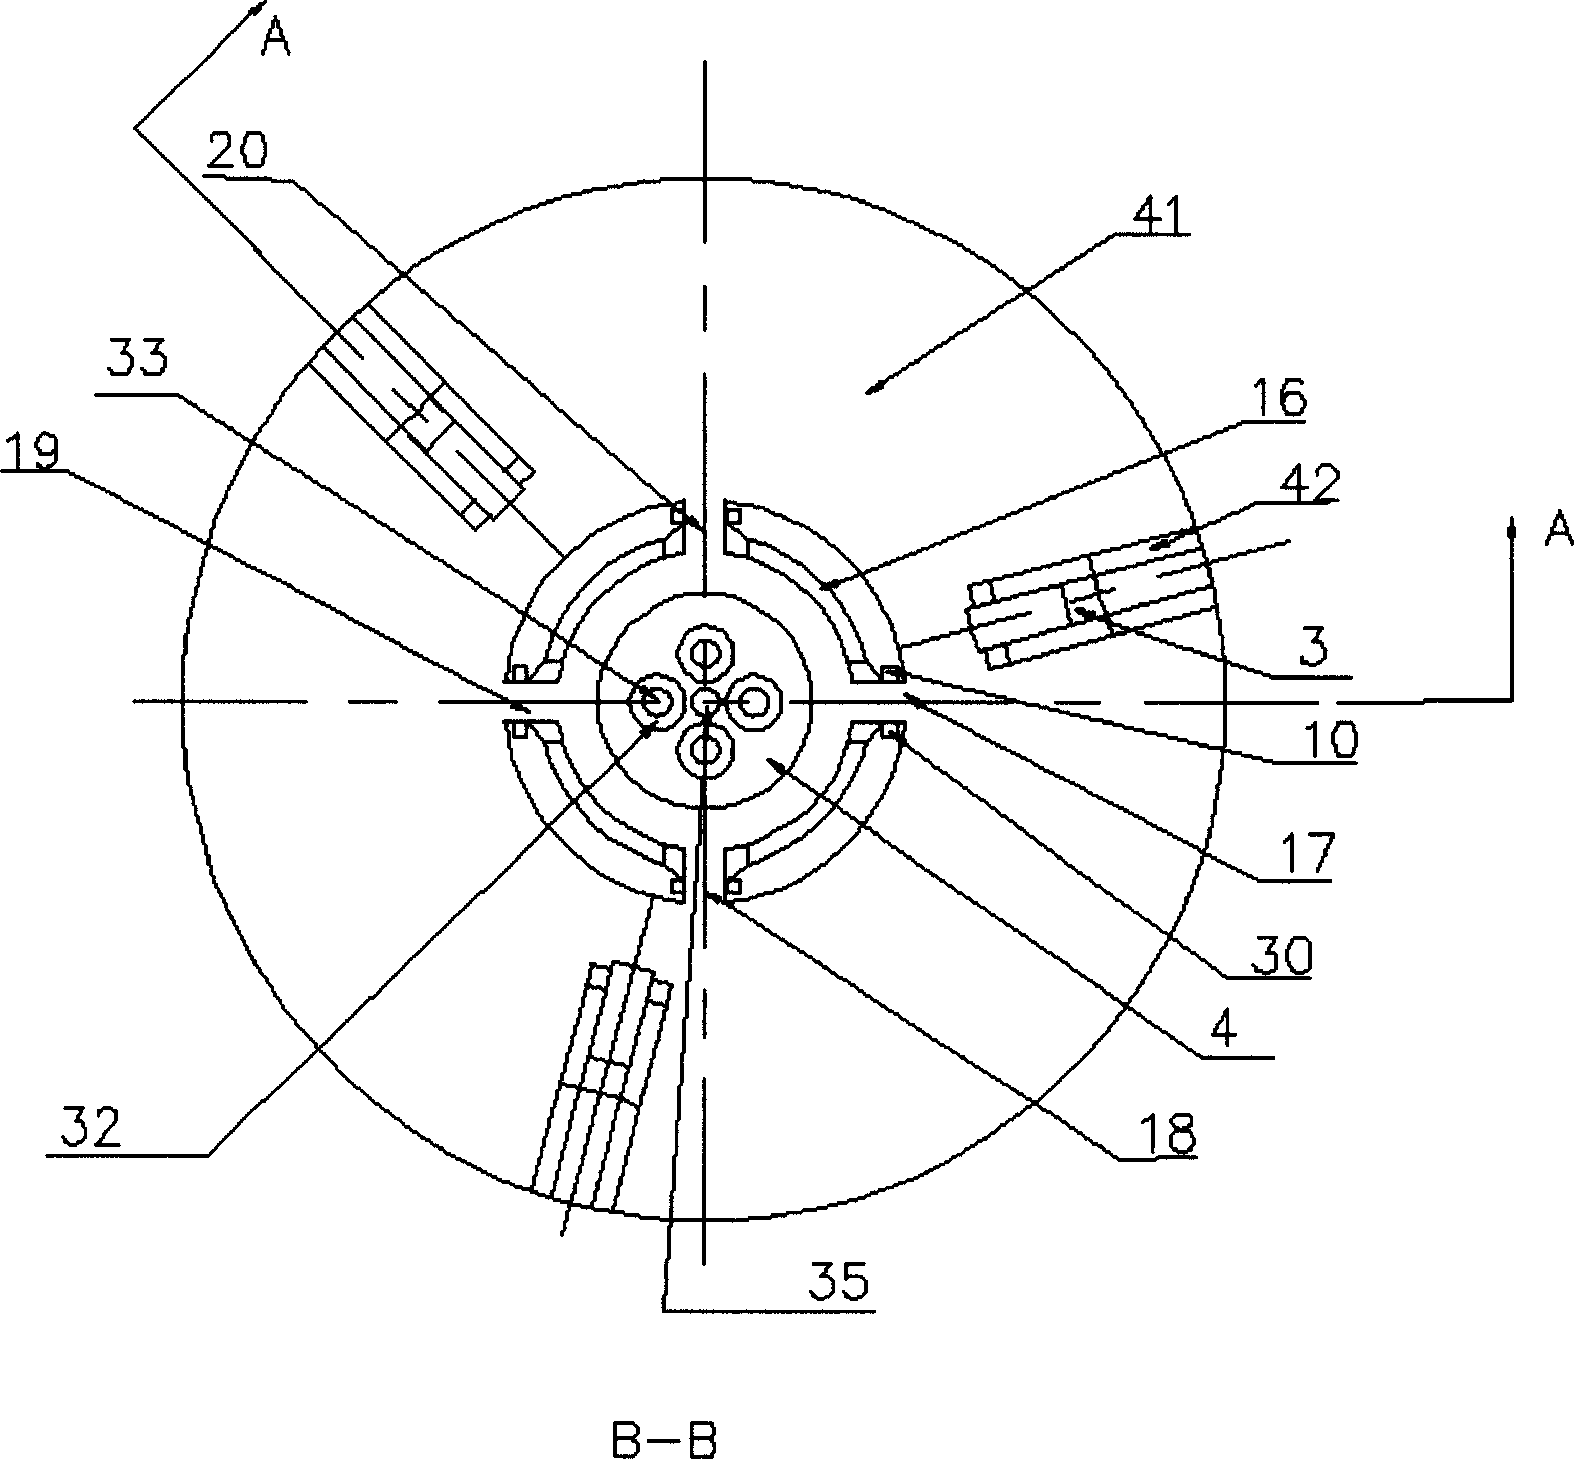 Automatic underwater electromechanial connector